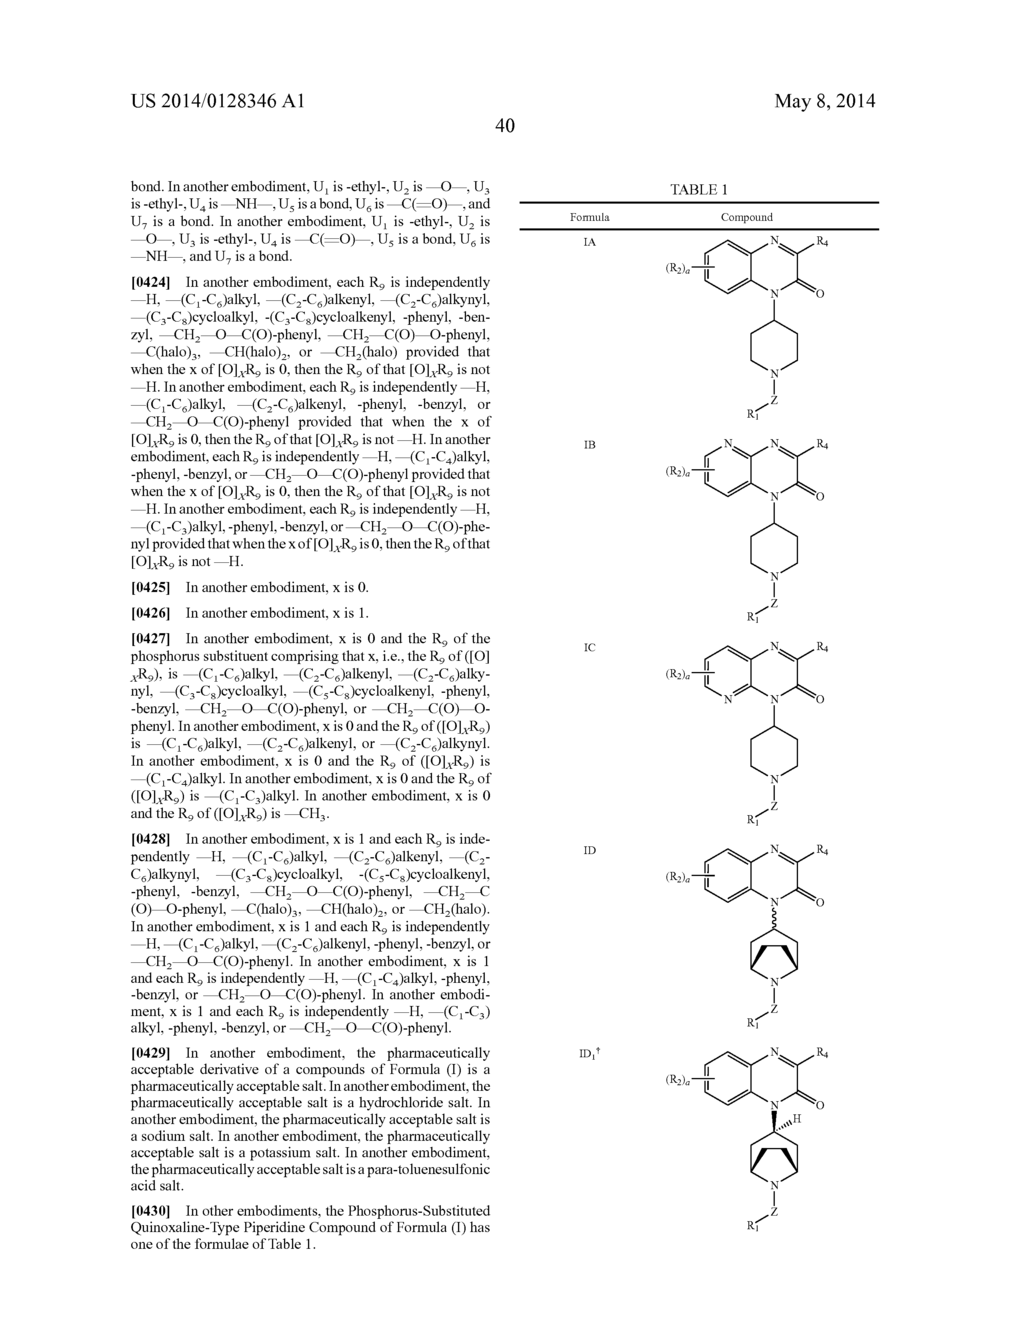 PHOSPHORUS-SUBSTITUTED QUINOXALINE-TYPE PIPERIDINE COMPOUNDS AND USES     THEREOF - diagram, schematic, and image 41